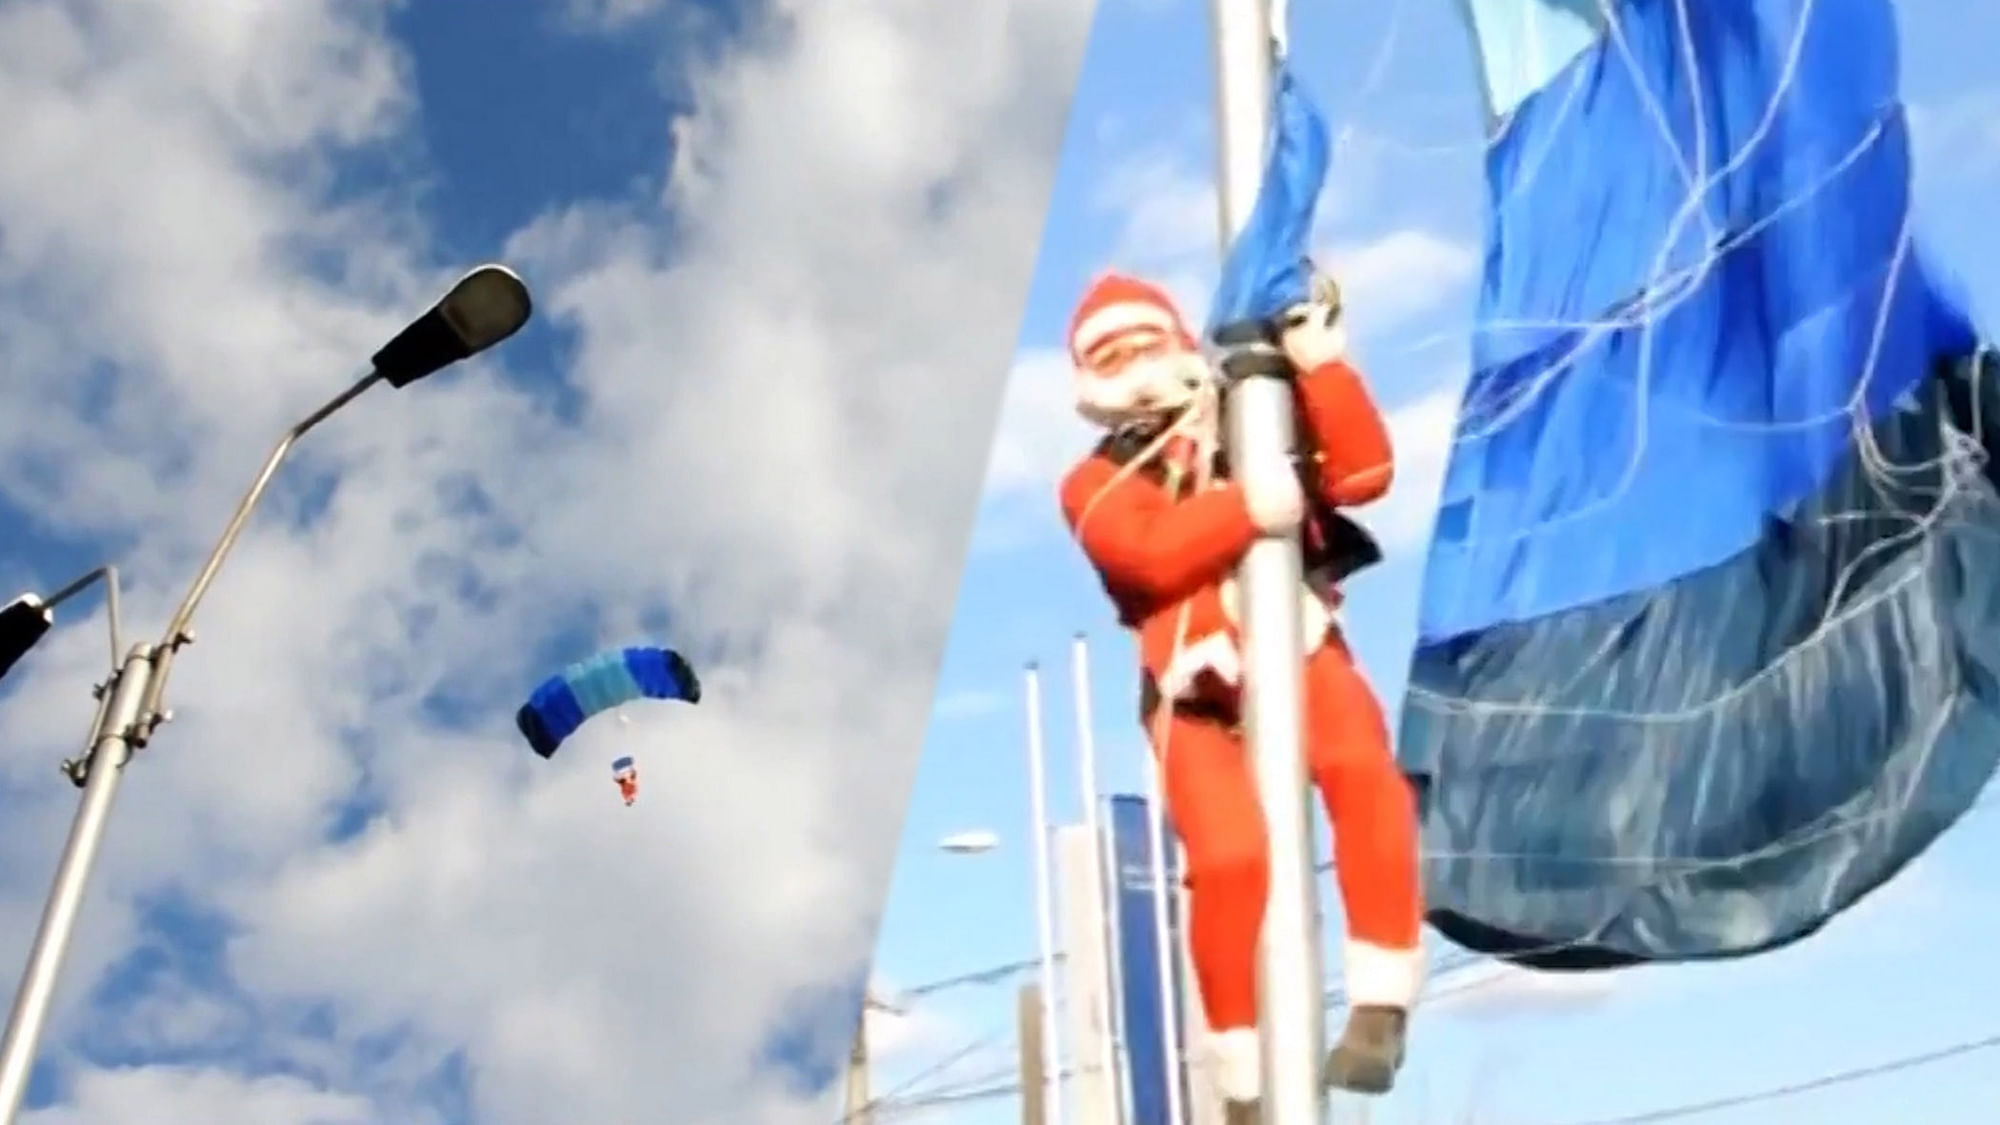 This Santa’s landing didn’t go quite as planned.  (Photo: AP/Newsflare)